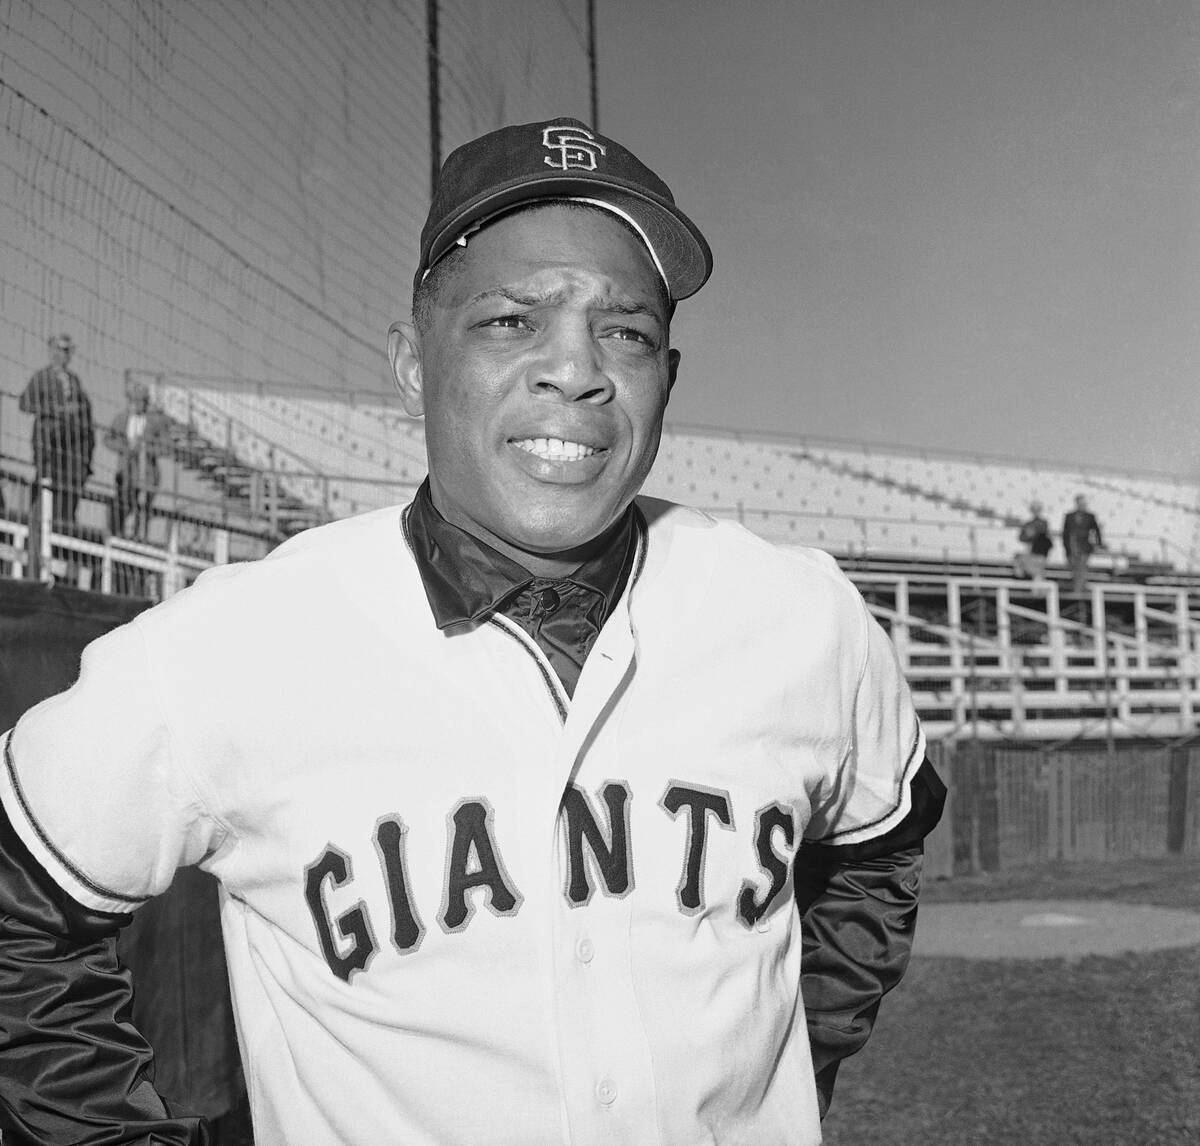 San Francisco Giants outfielder Willie Mays, March 1963. (AP Photo/Ed Widdis)